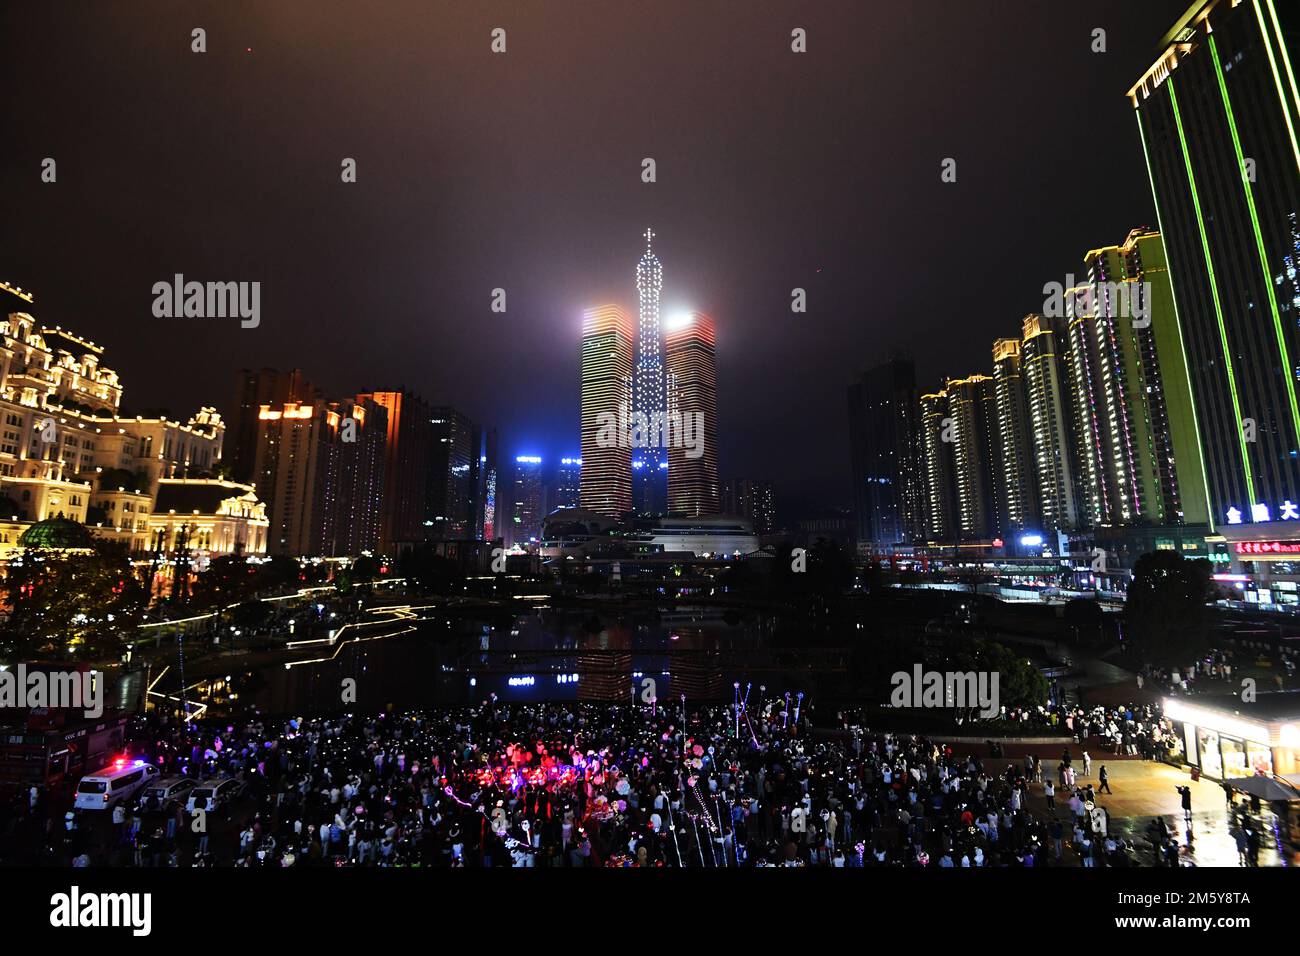 GUIYANG, CHINA - DECEMBER 31, 2022 - 500 unmanned aerial vehicles (UAVs) perform on New Year's Eve in Guiyang, Guizhou province, China, Dec 31, 2022. Stock Photo